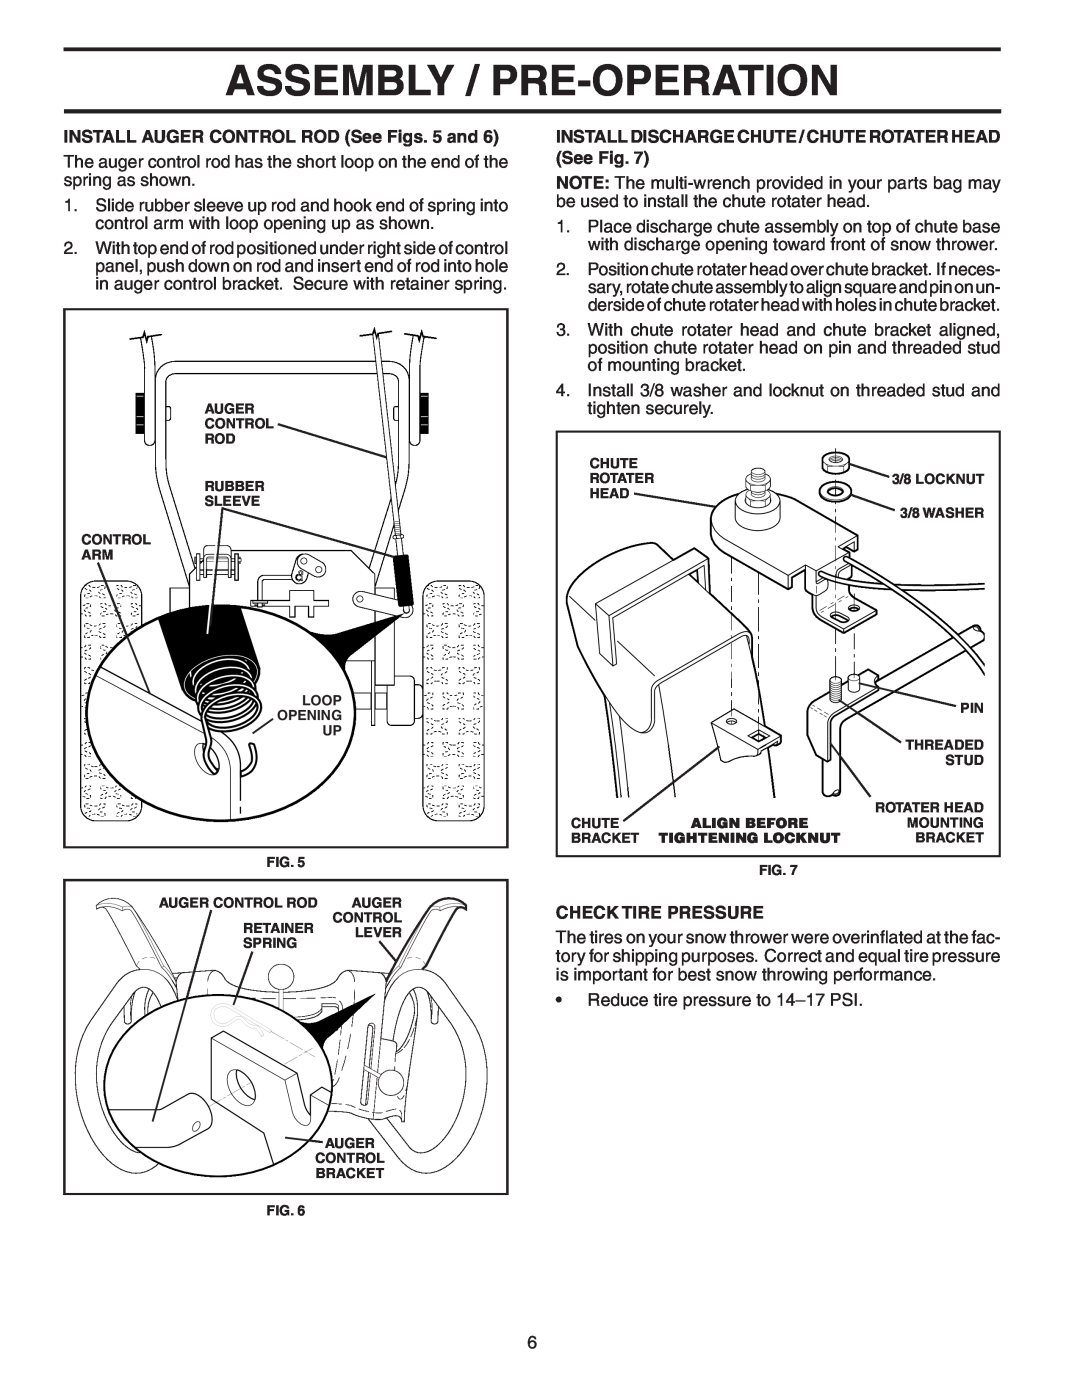 Poulan B8527ES owner manual Assembly / Pre-Operation, INSTALL AUGER CONTROL ROD See Figs. 5 and, Check Tire Pressure 